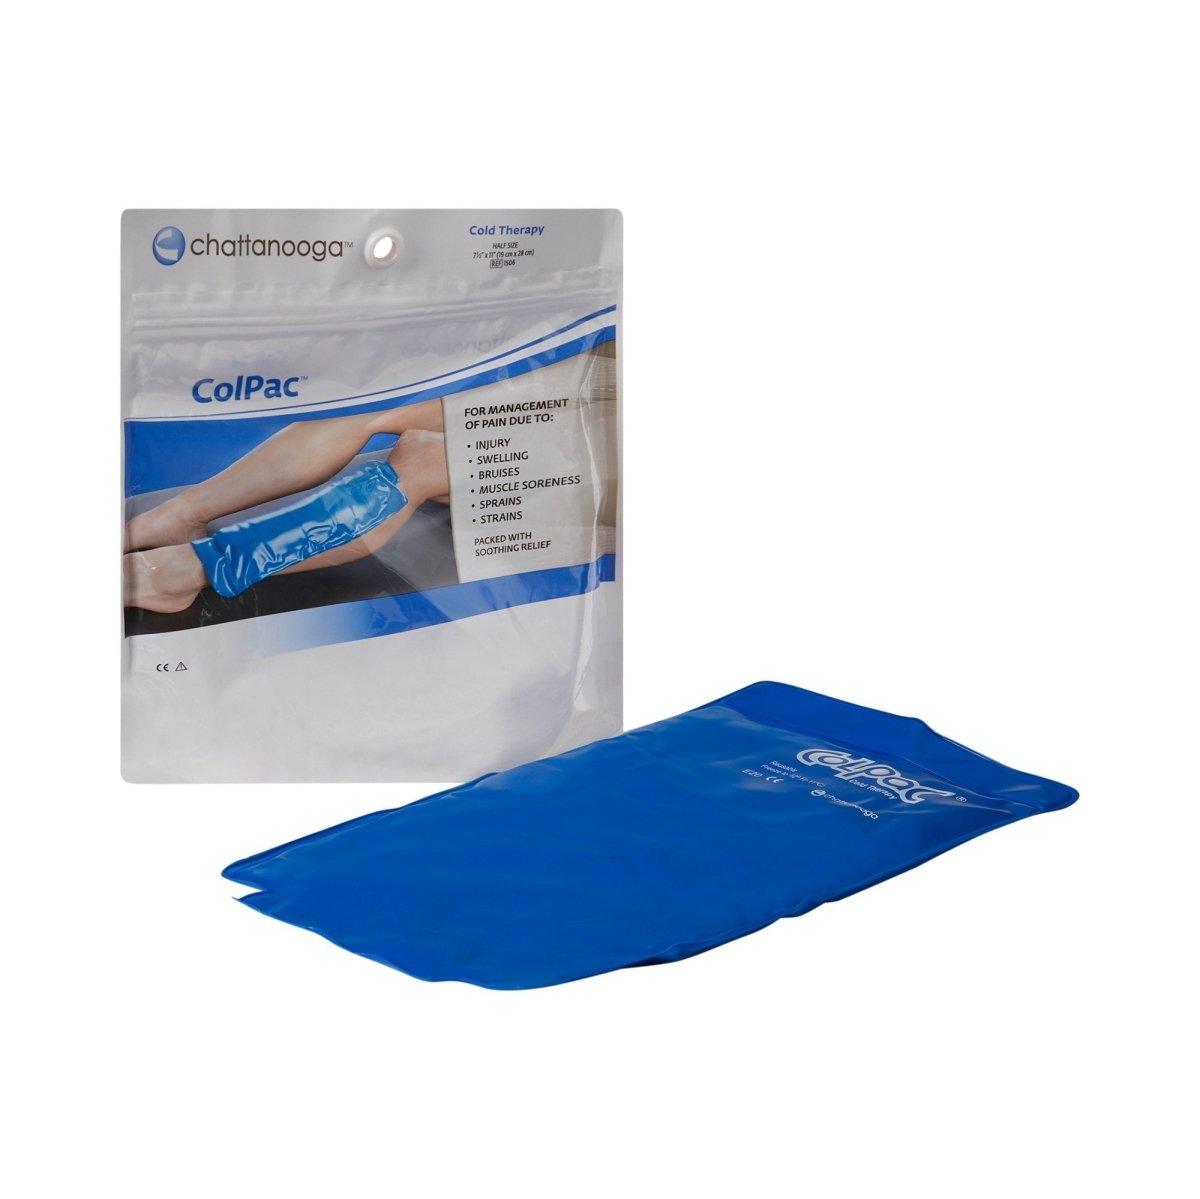 ColPac Cold Therapy, 7½ x 11 Inch - 147549_EA - 1